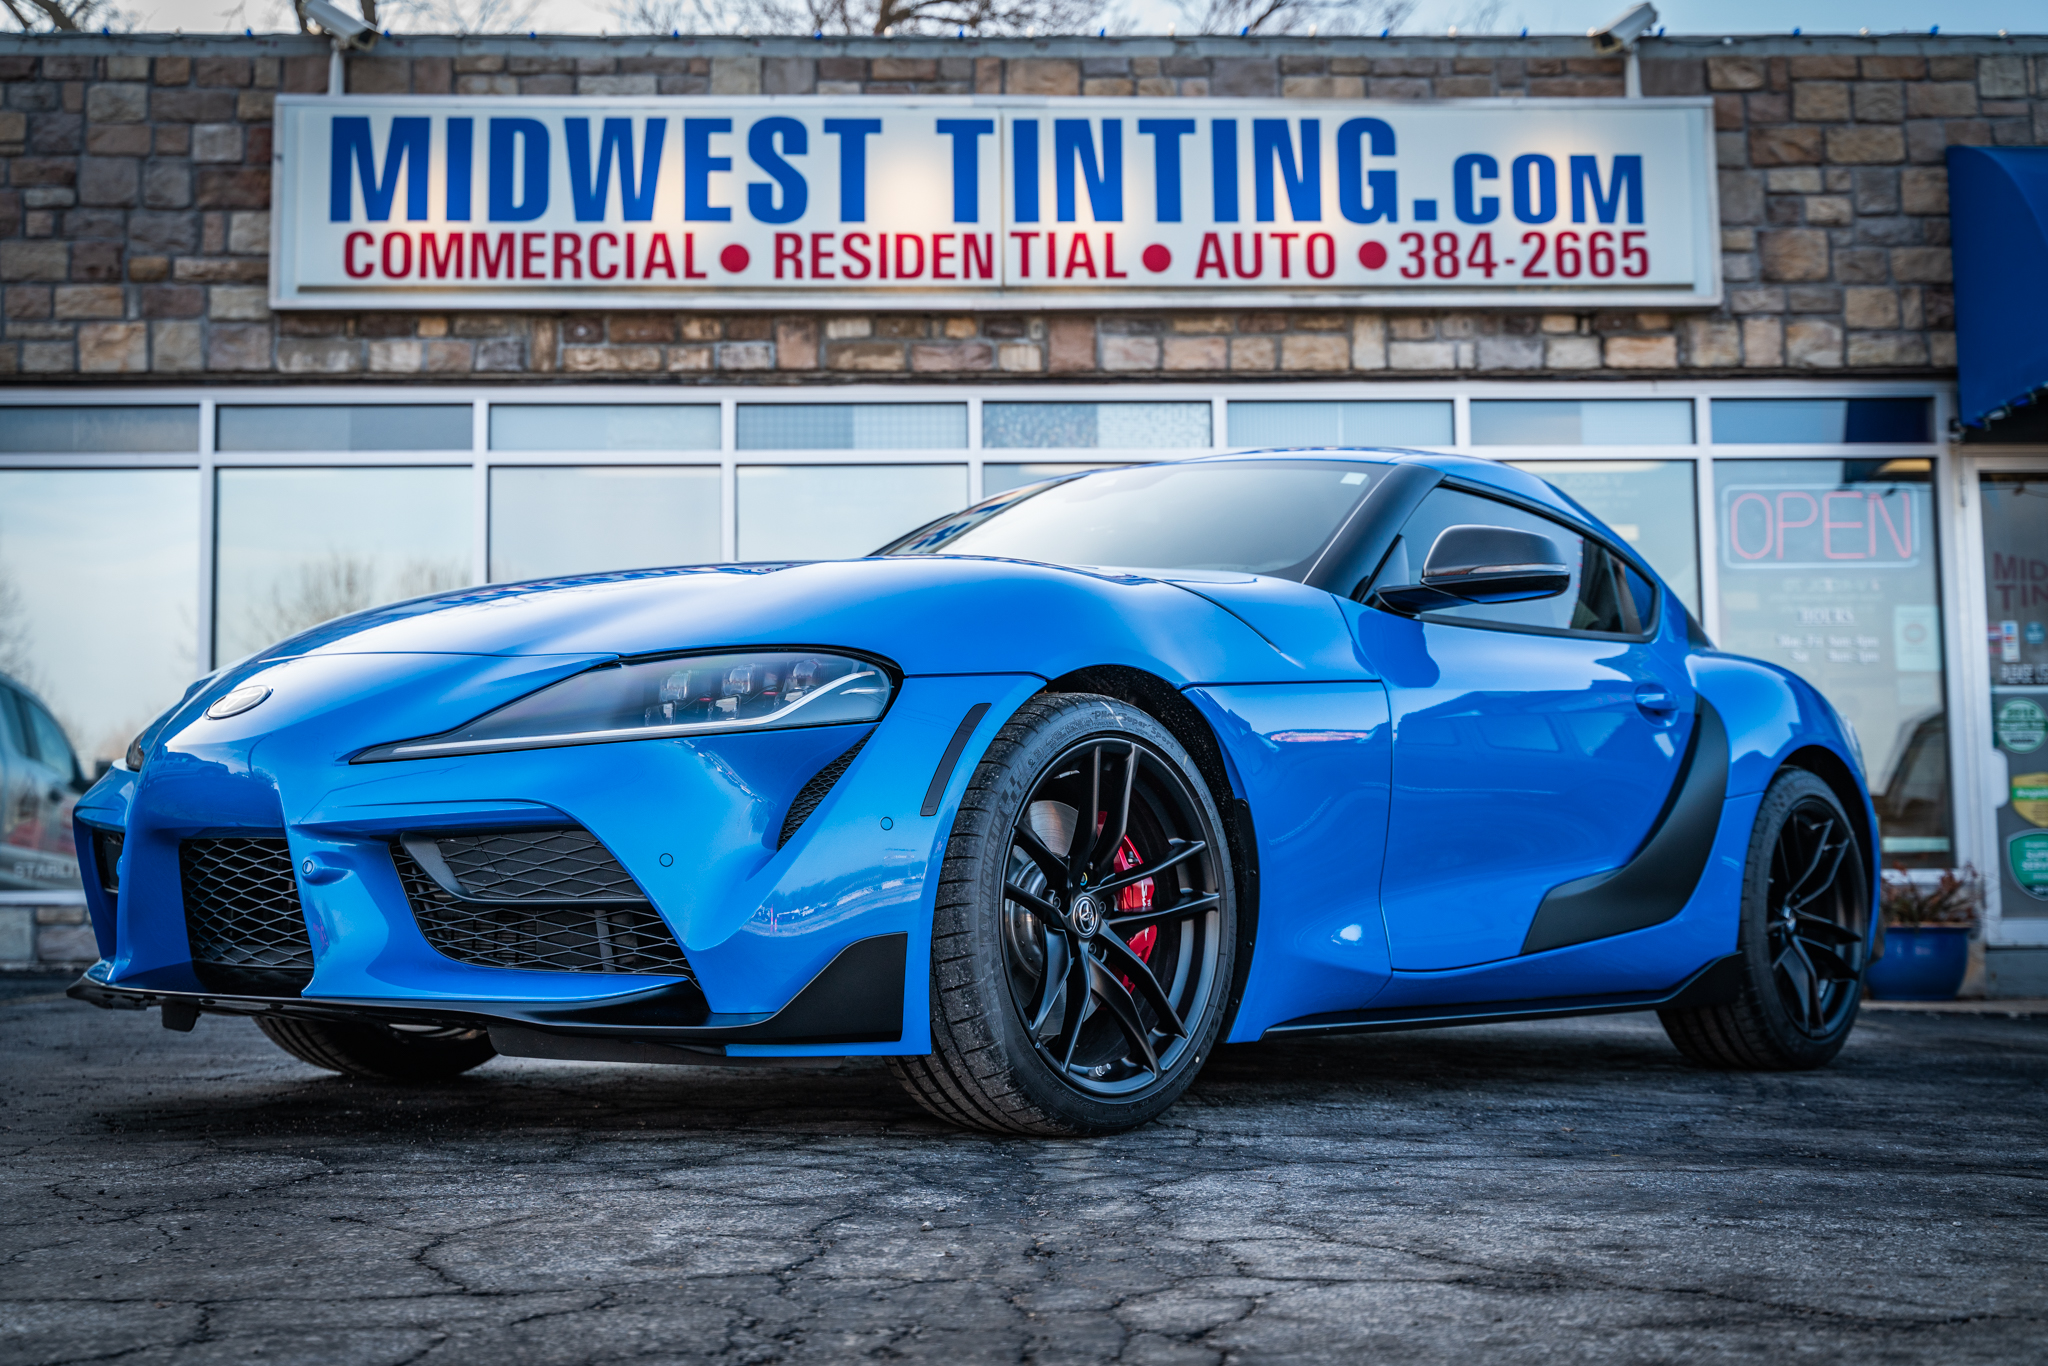 Toyota Supra Gets XPEL Paint Protection Film & Ceramic Paint Coating in Kansas City - Paint Protection Film and Ceramic Paint Coating in Kansas City - Check Out These Top 5 Ways To Customize Your Vehicle